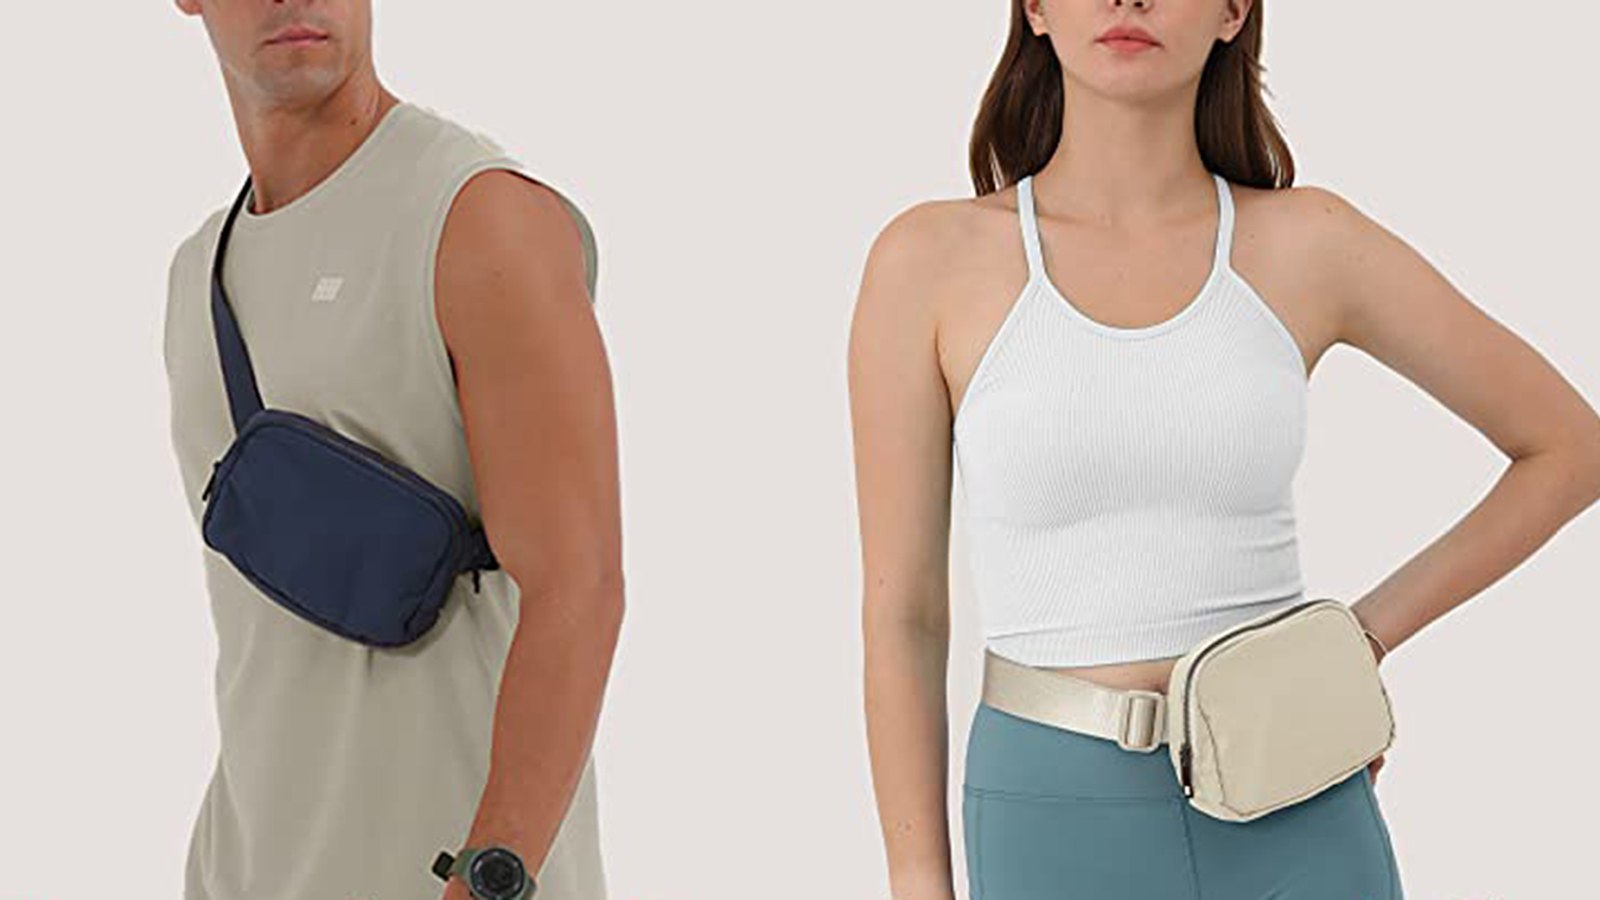 This Costco Belt Bag is Only $14.99 & Looks Just Like lululemon